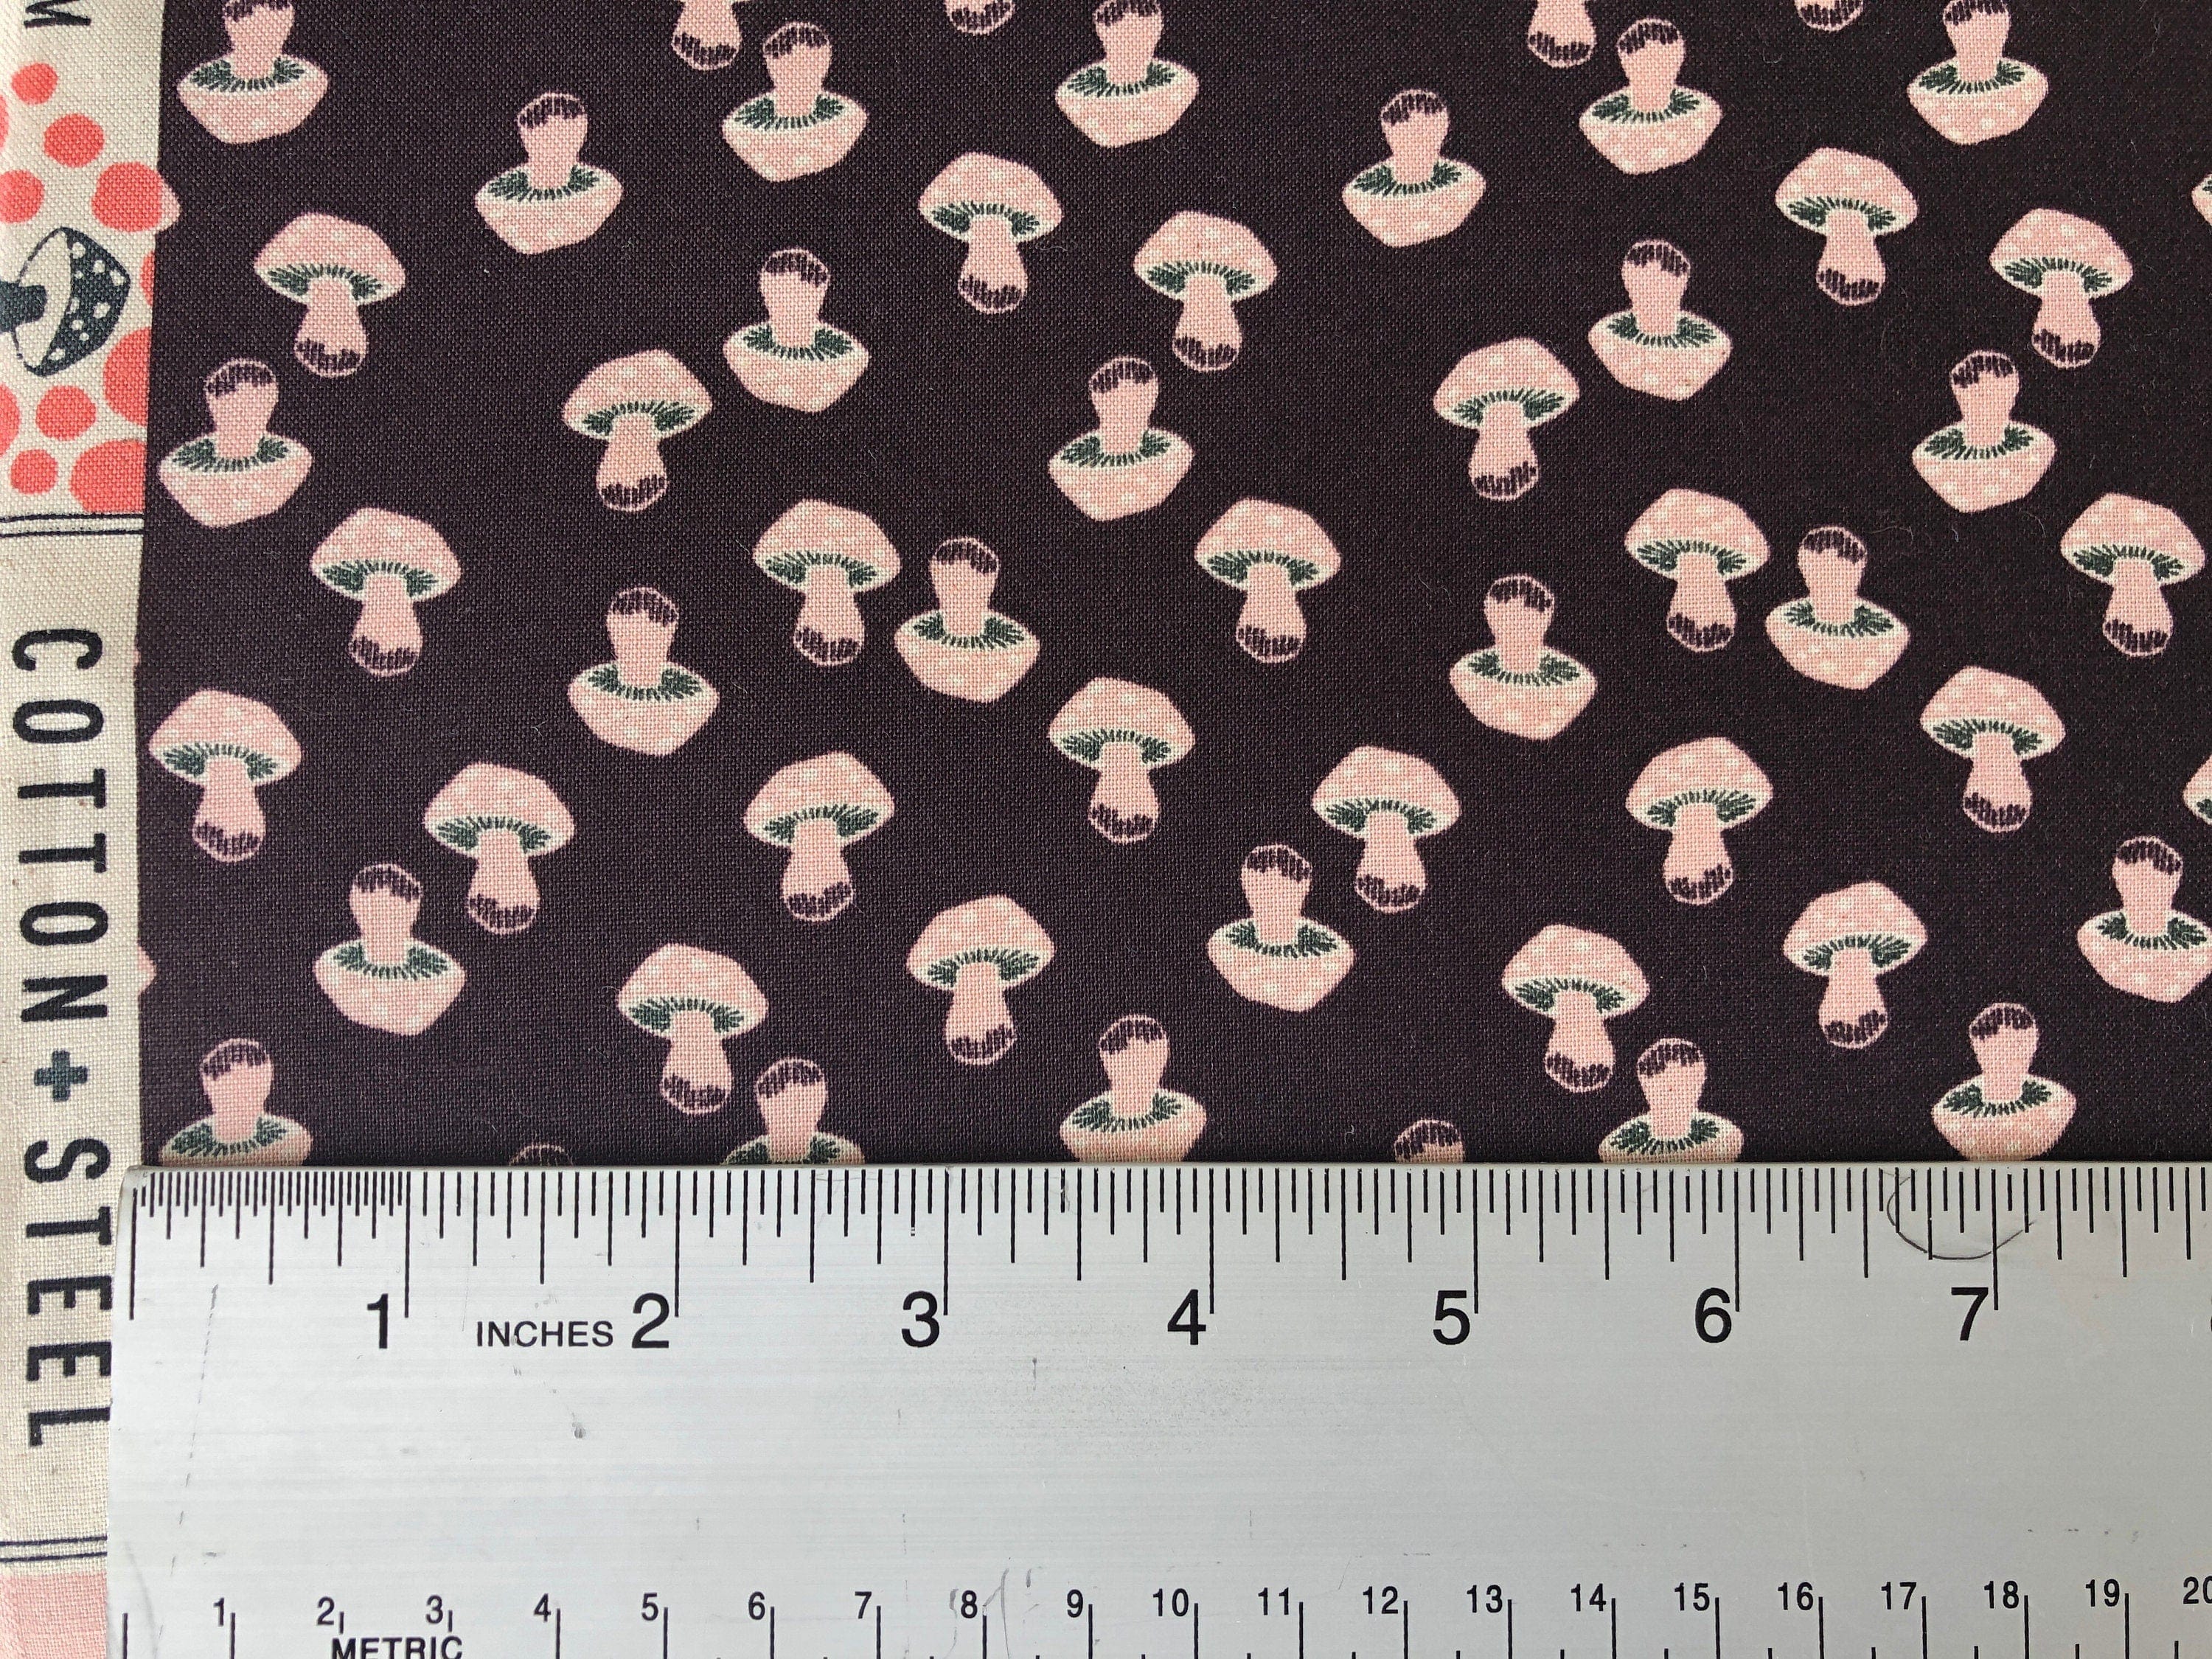 In The Woods -Mushroom-Eggplant Unbleached Fabric- Loes Van Oosten - Cotton + Steel - RJR Fabric - Quilting Cotton Fabric -